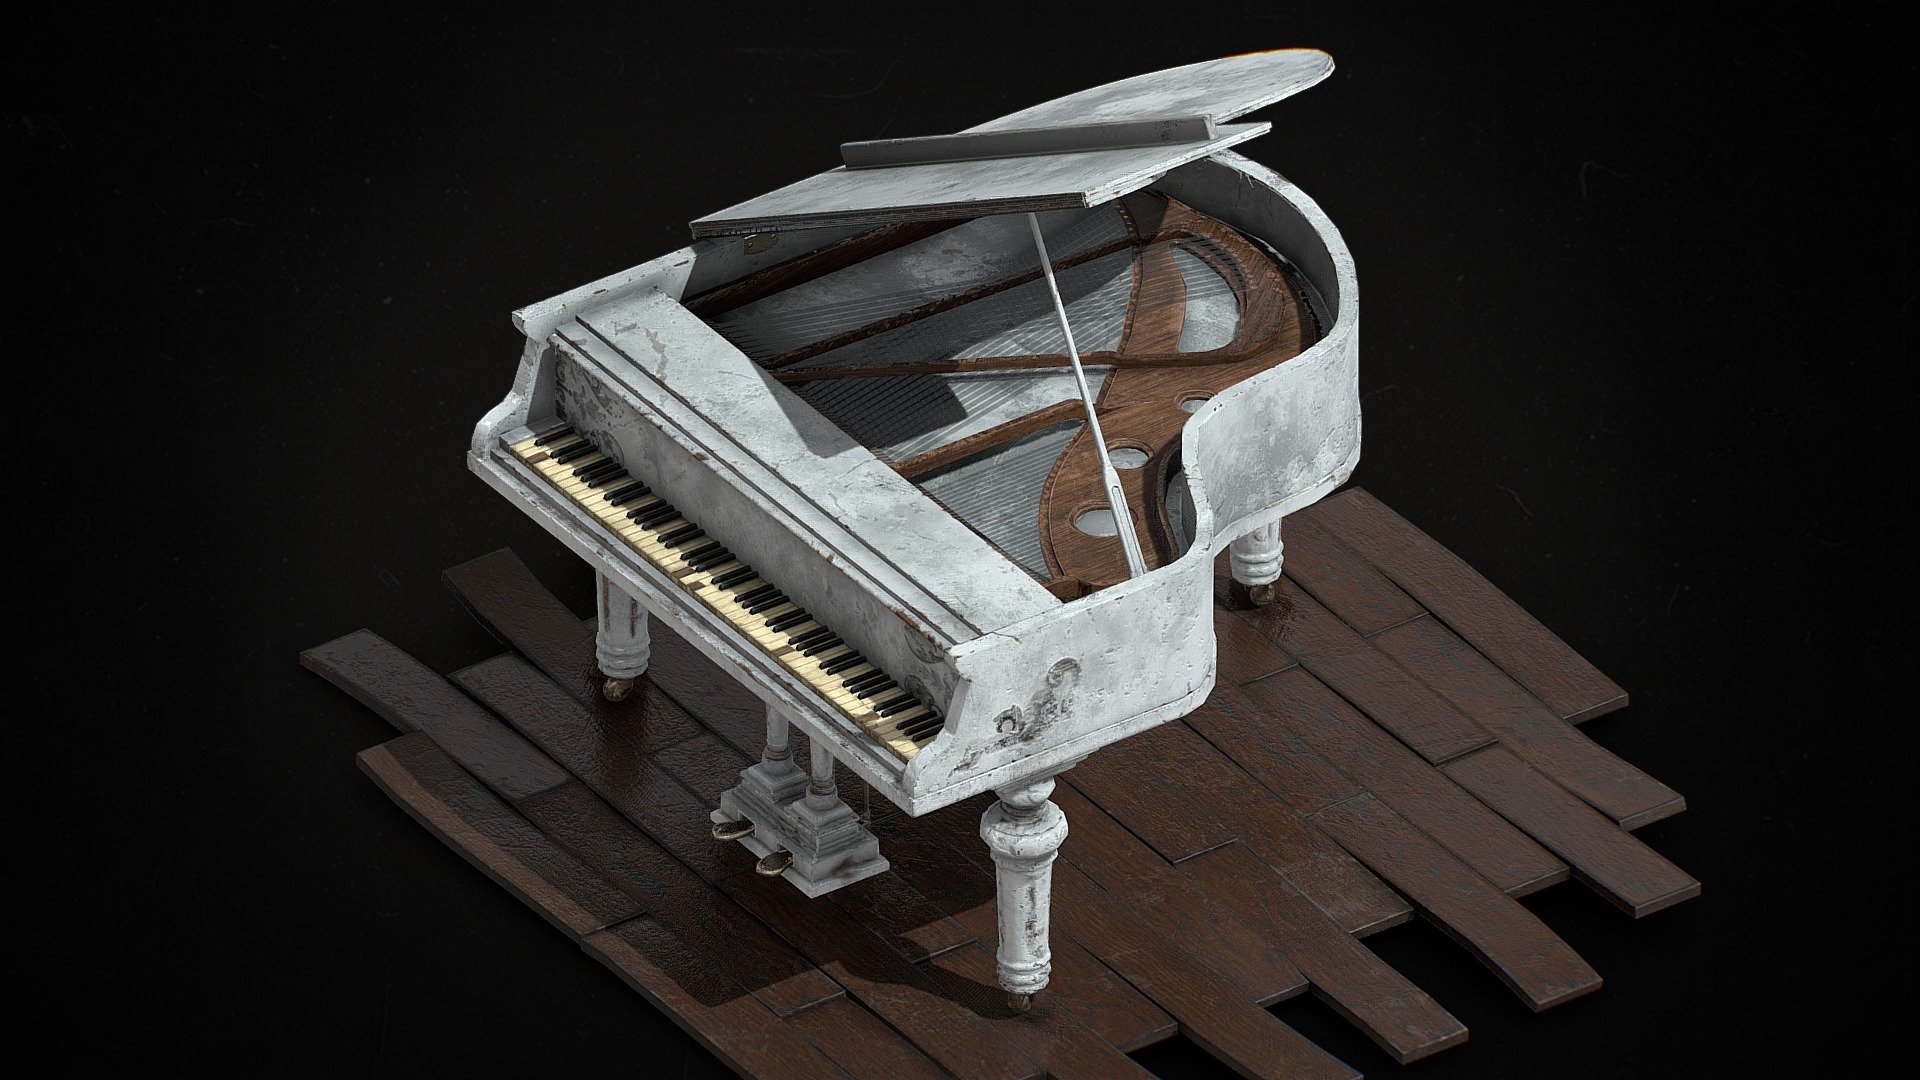 The model is game ready and optimized to be used in real time applications. It has a total of 5263 Vertices.





Download the 8K textures here:
Materials_8K

Artstation:
https://www.artstation.com/artwork/nQrrNE?commentId=3505931 - Abandoned Grand Piano - Buy Royalty Free 3D model by Pandurus (@ChubbyPanda) 3d model